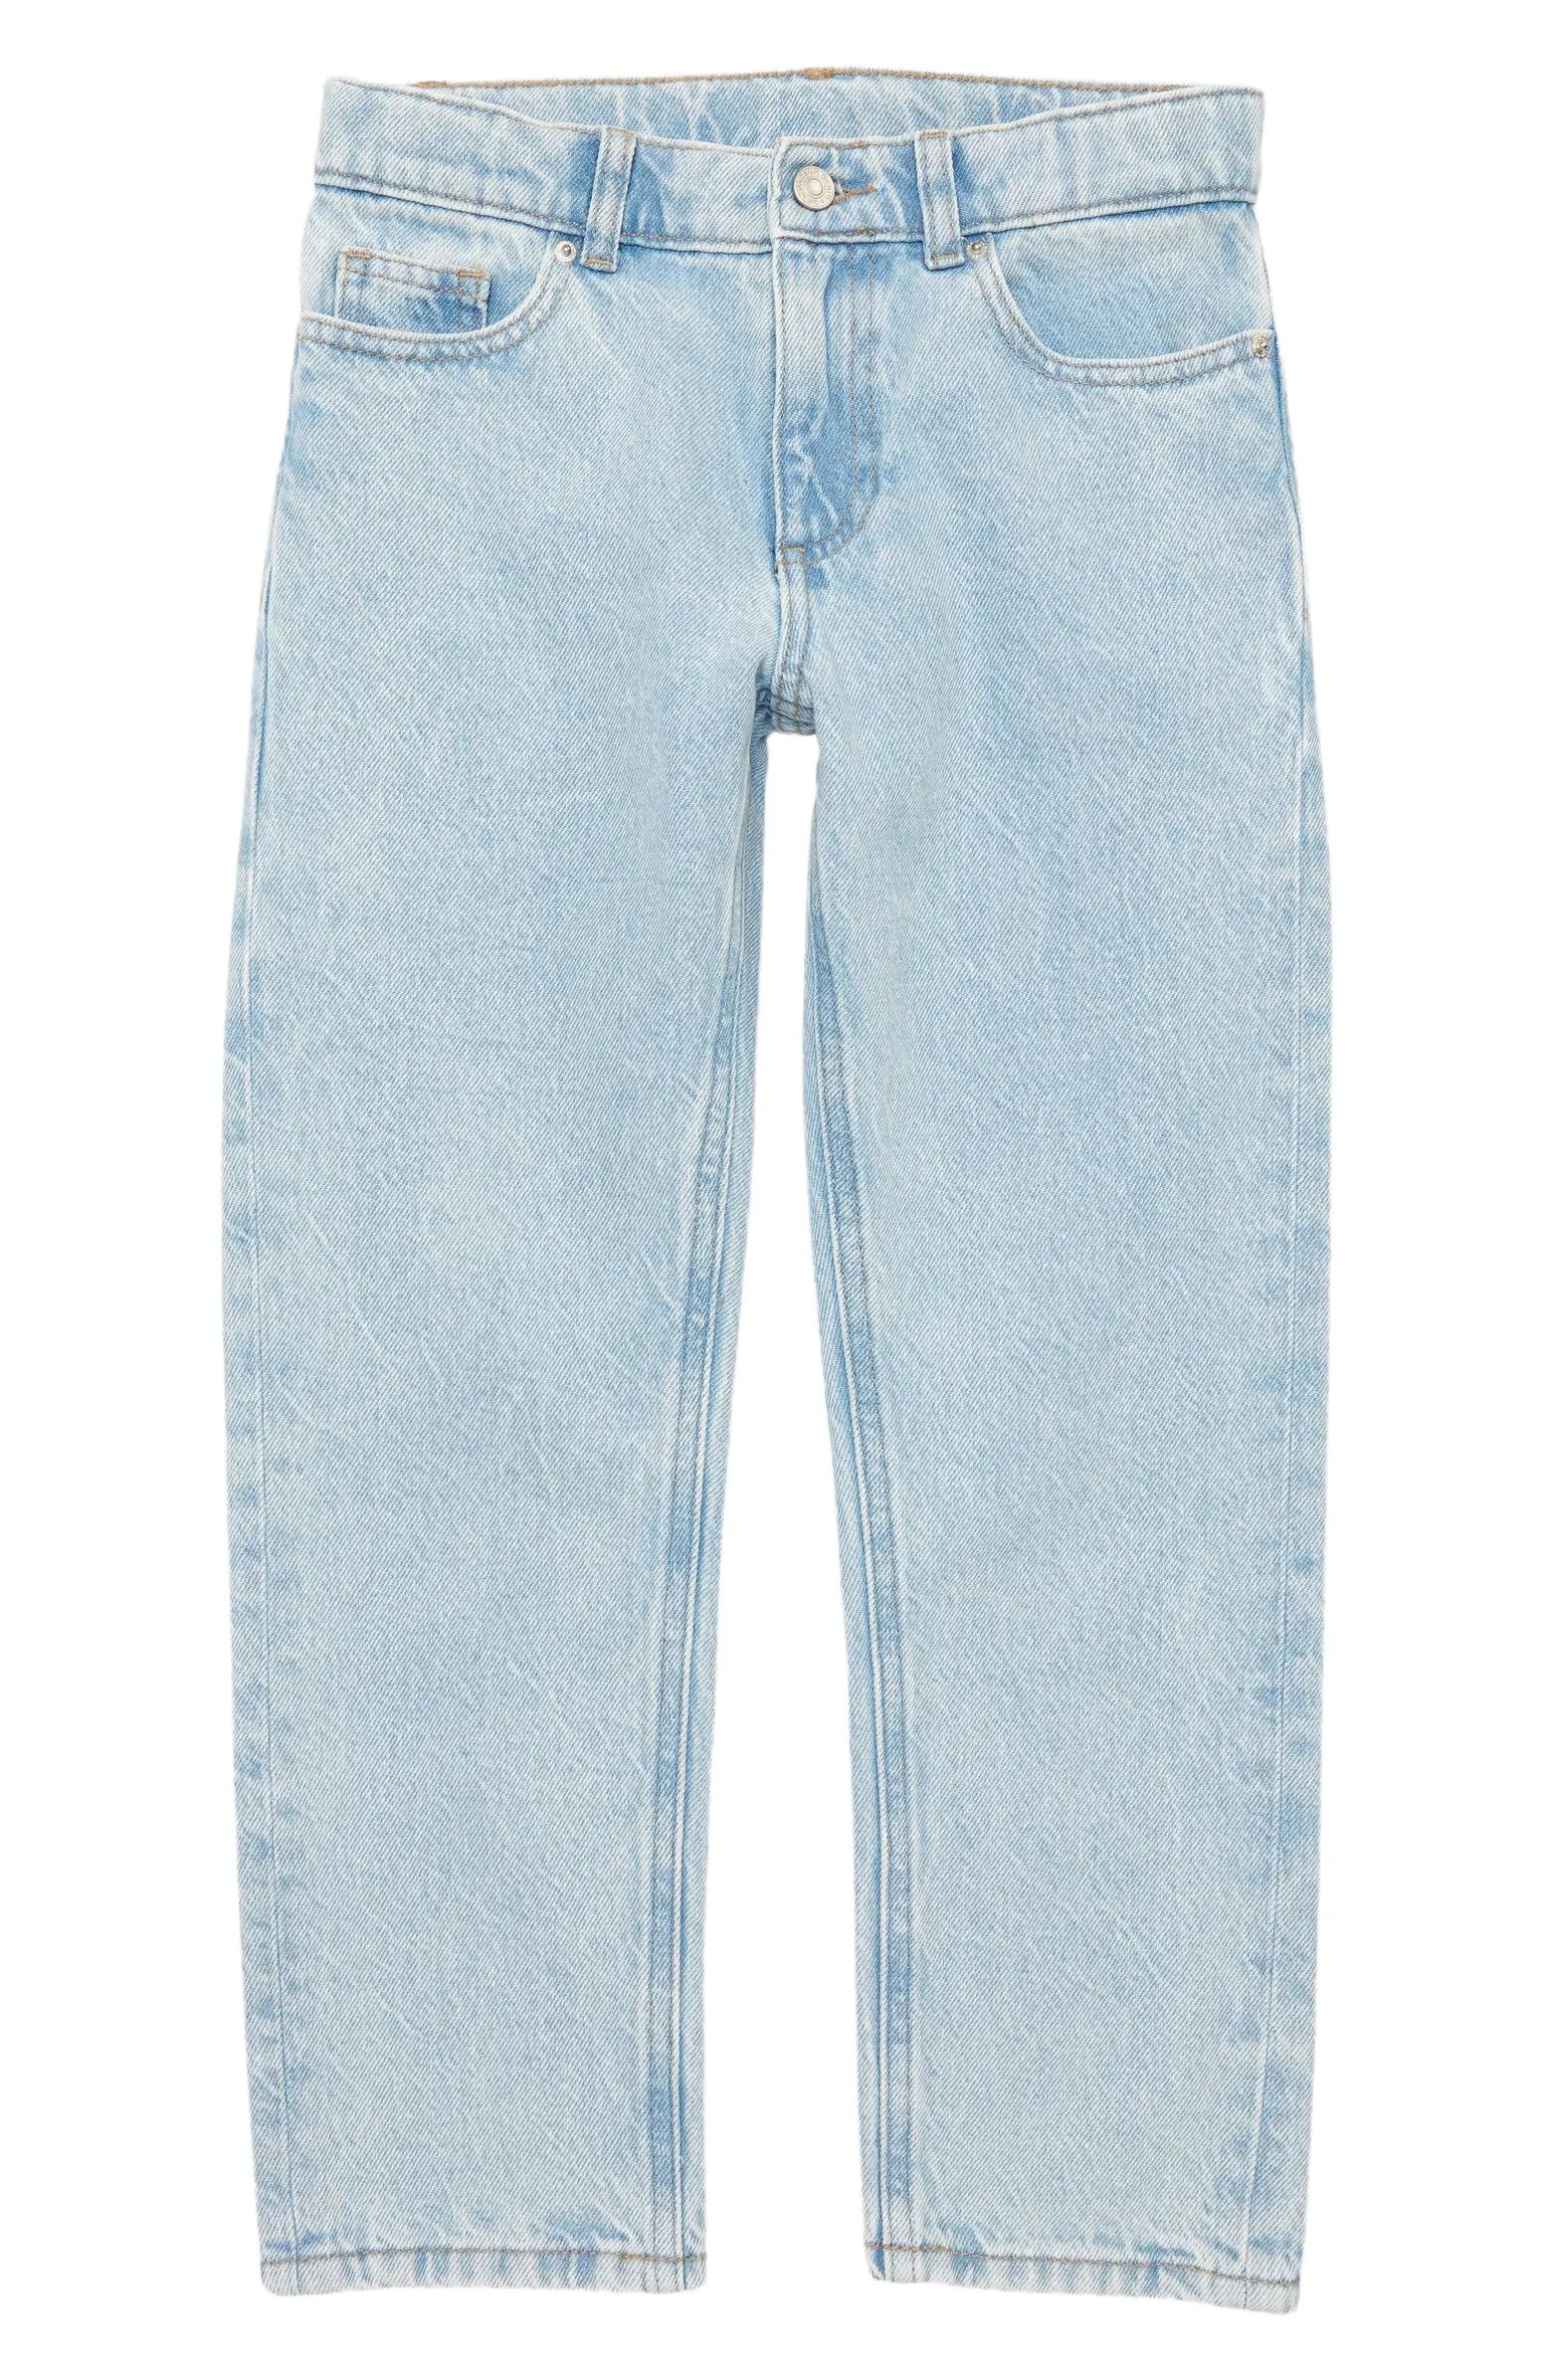 PacSun Kids' Nonstretch Jeans | Nordstrom | Nordstrom